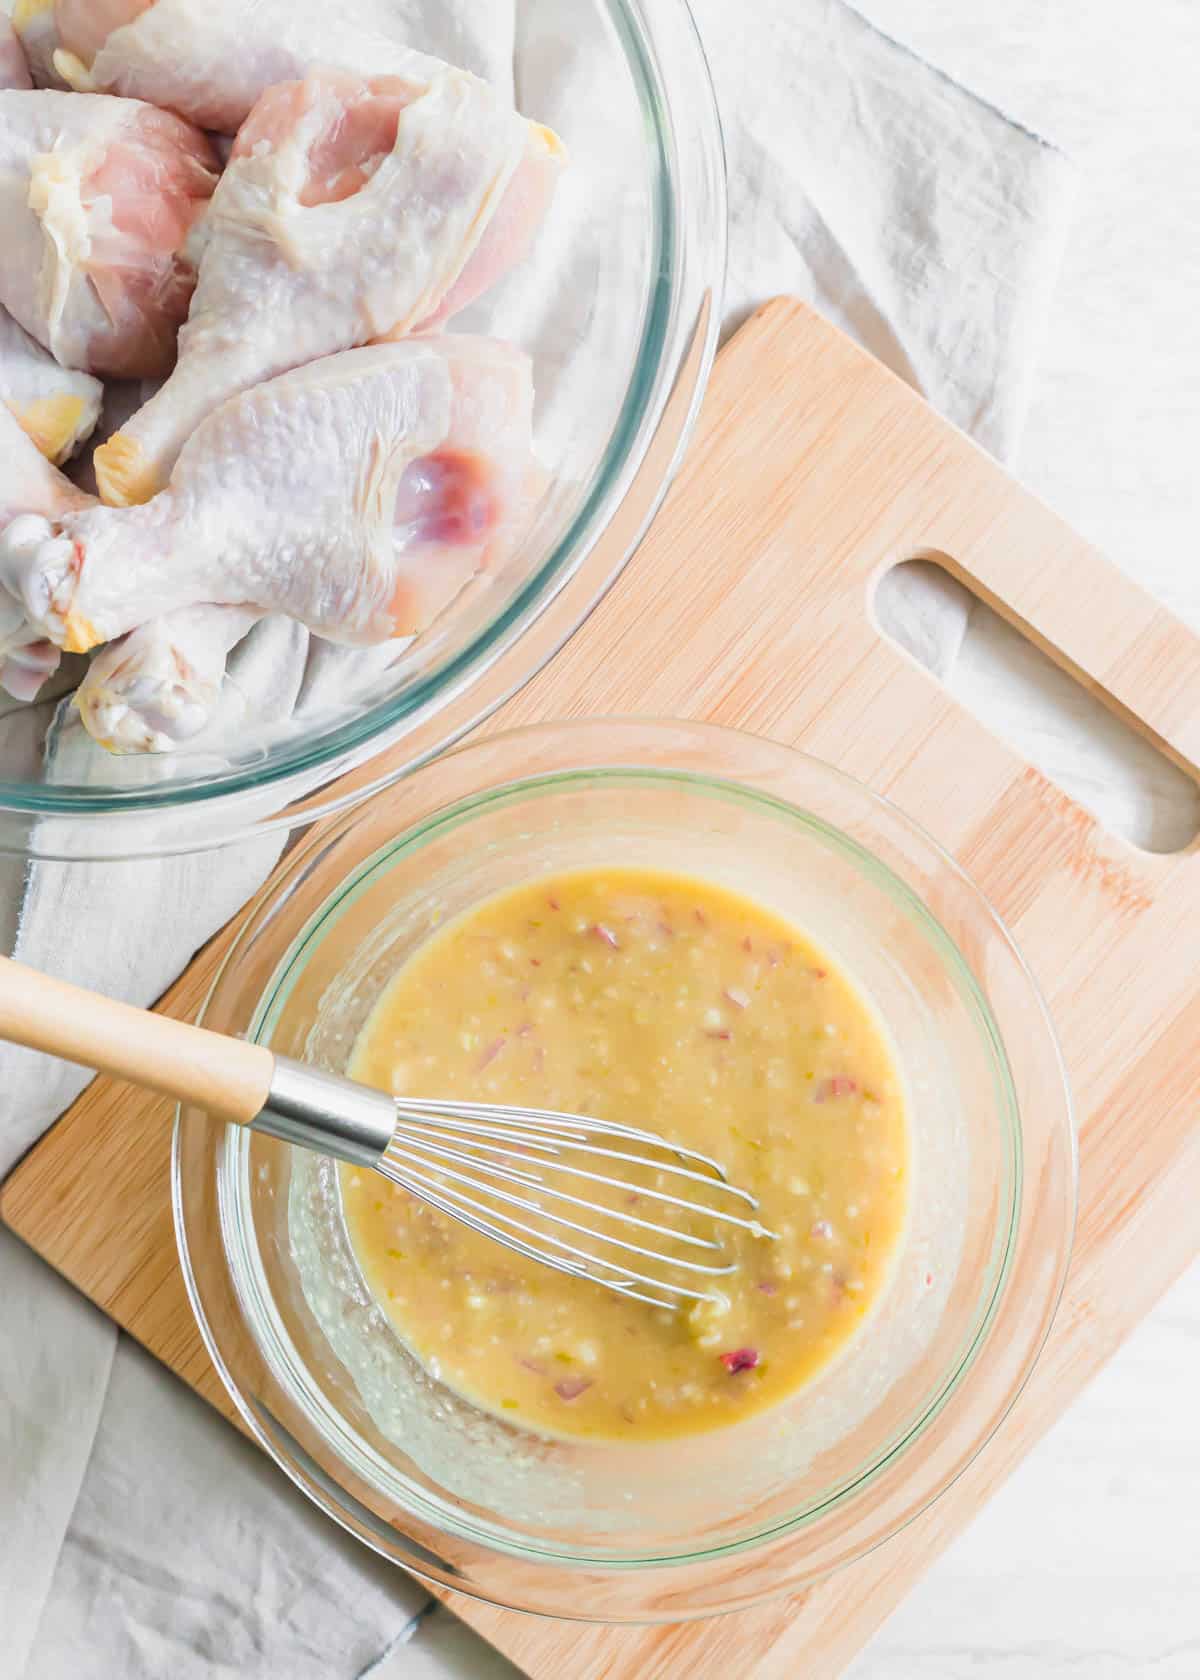 How to make the miso glaze for maple miso chicken drumsticks.